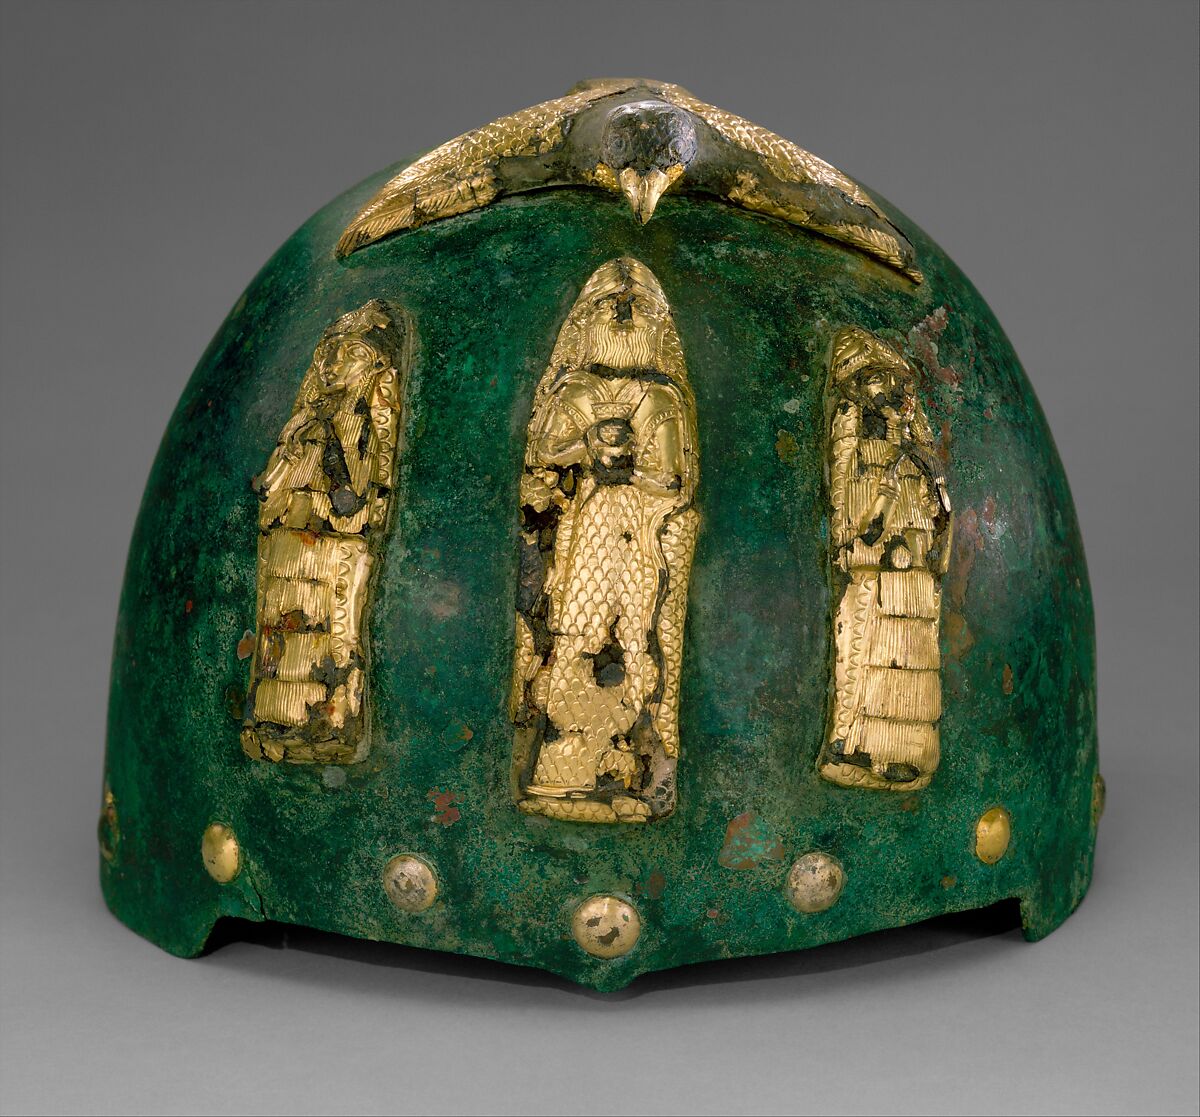 Helmet with divine figures beneath a bird with outstretched wings, Bronze, gold foil over bitumen, Elamite 